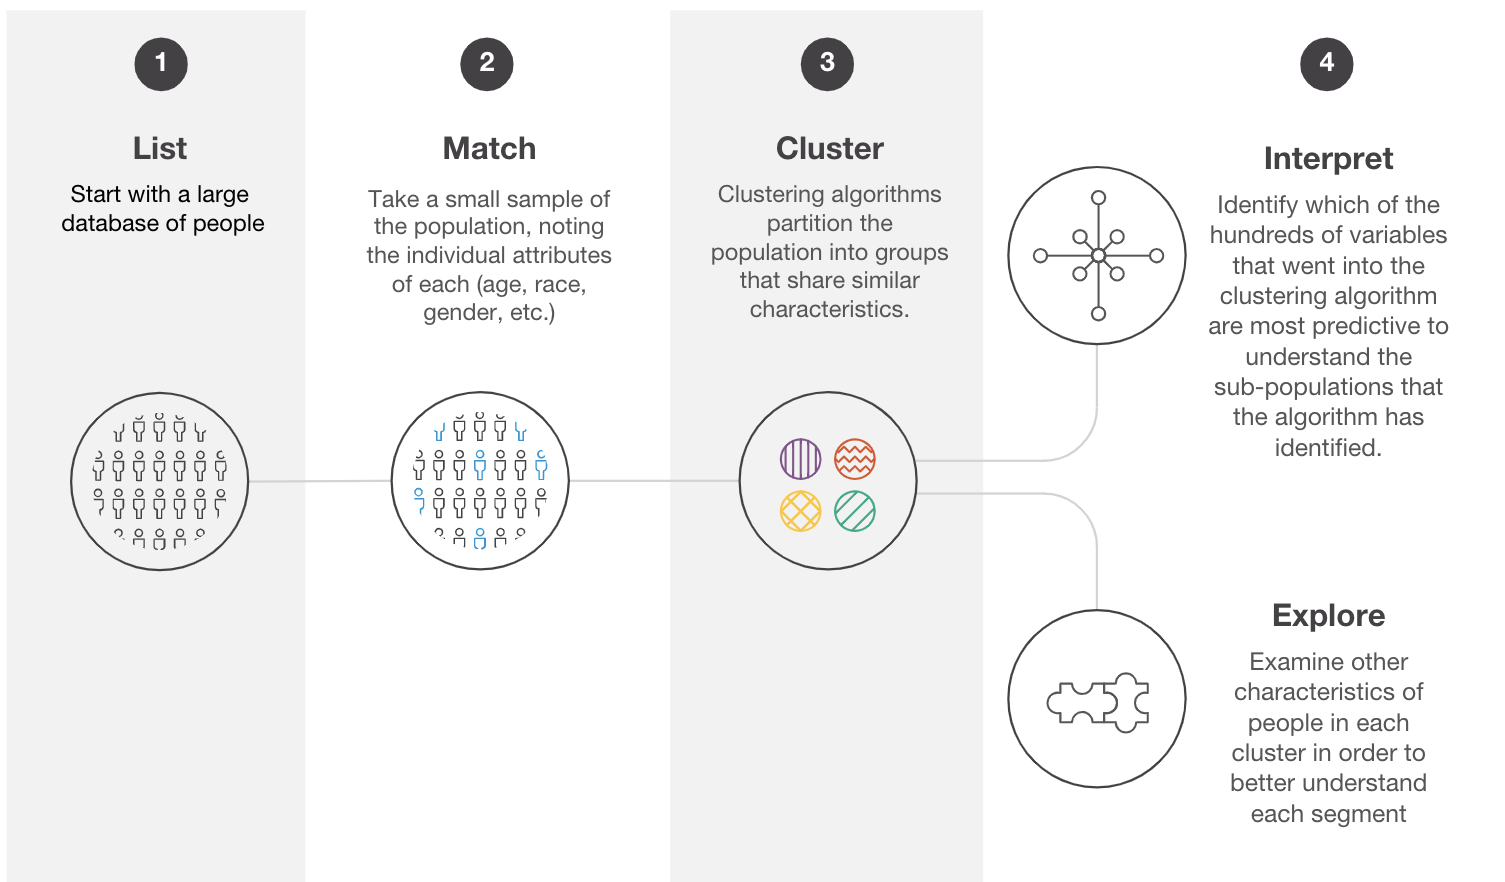 A schematic outlining the 4 steps: List; Match; Cluster; Interpret/Explore